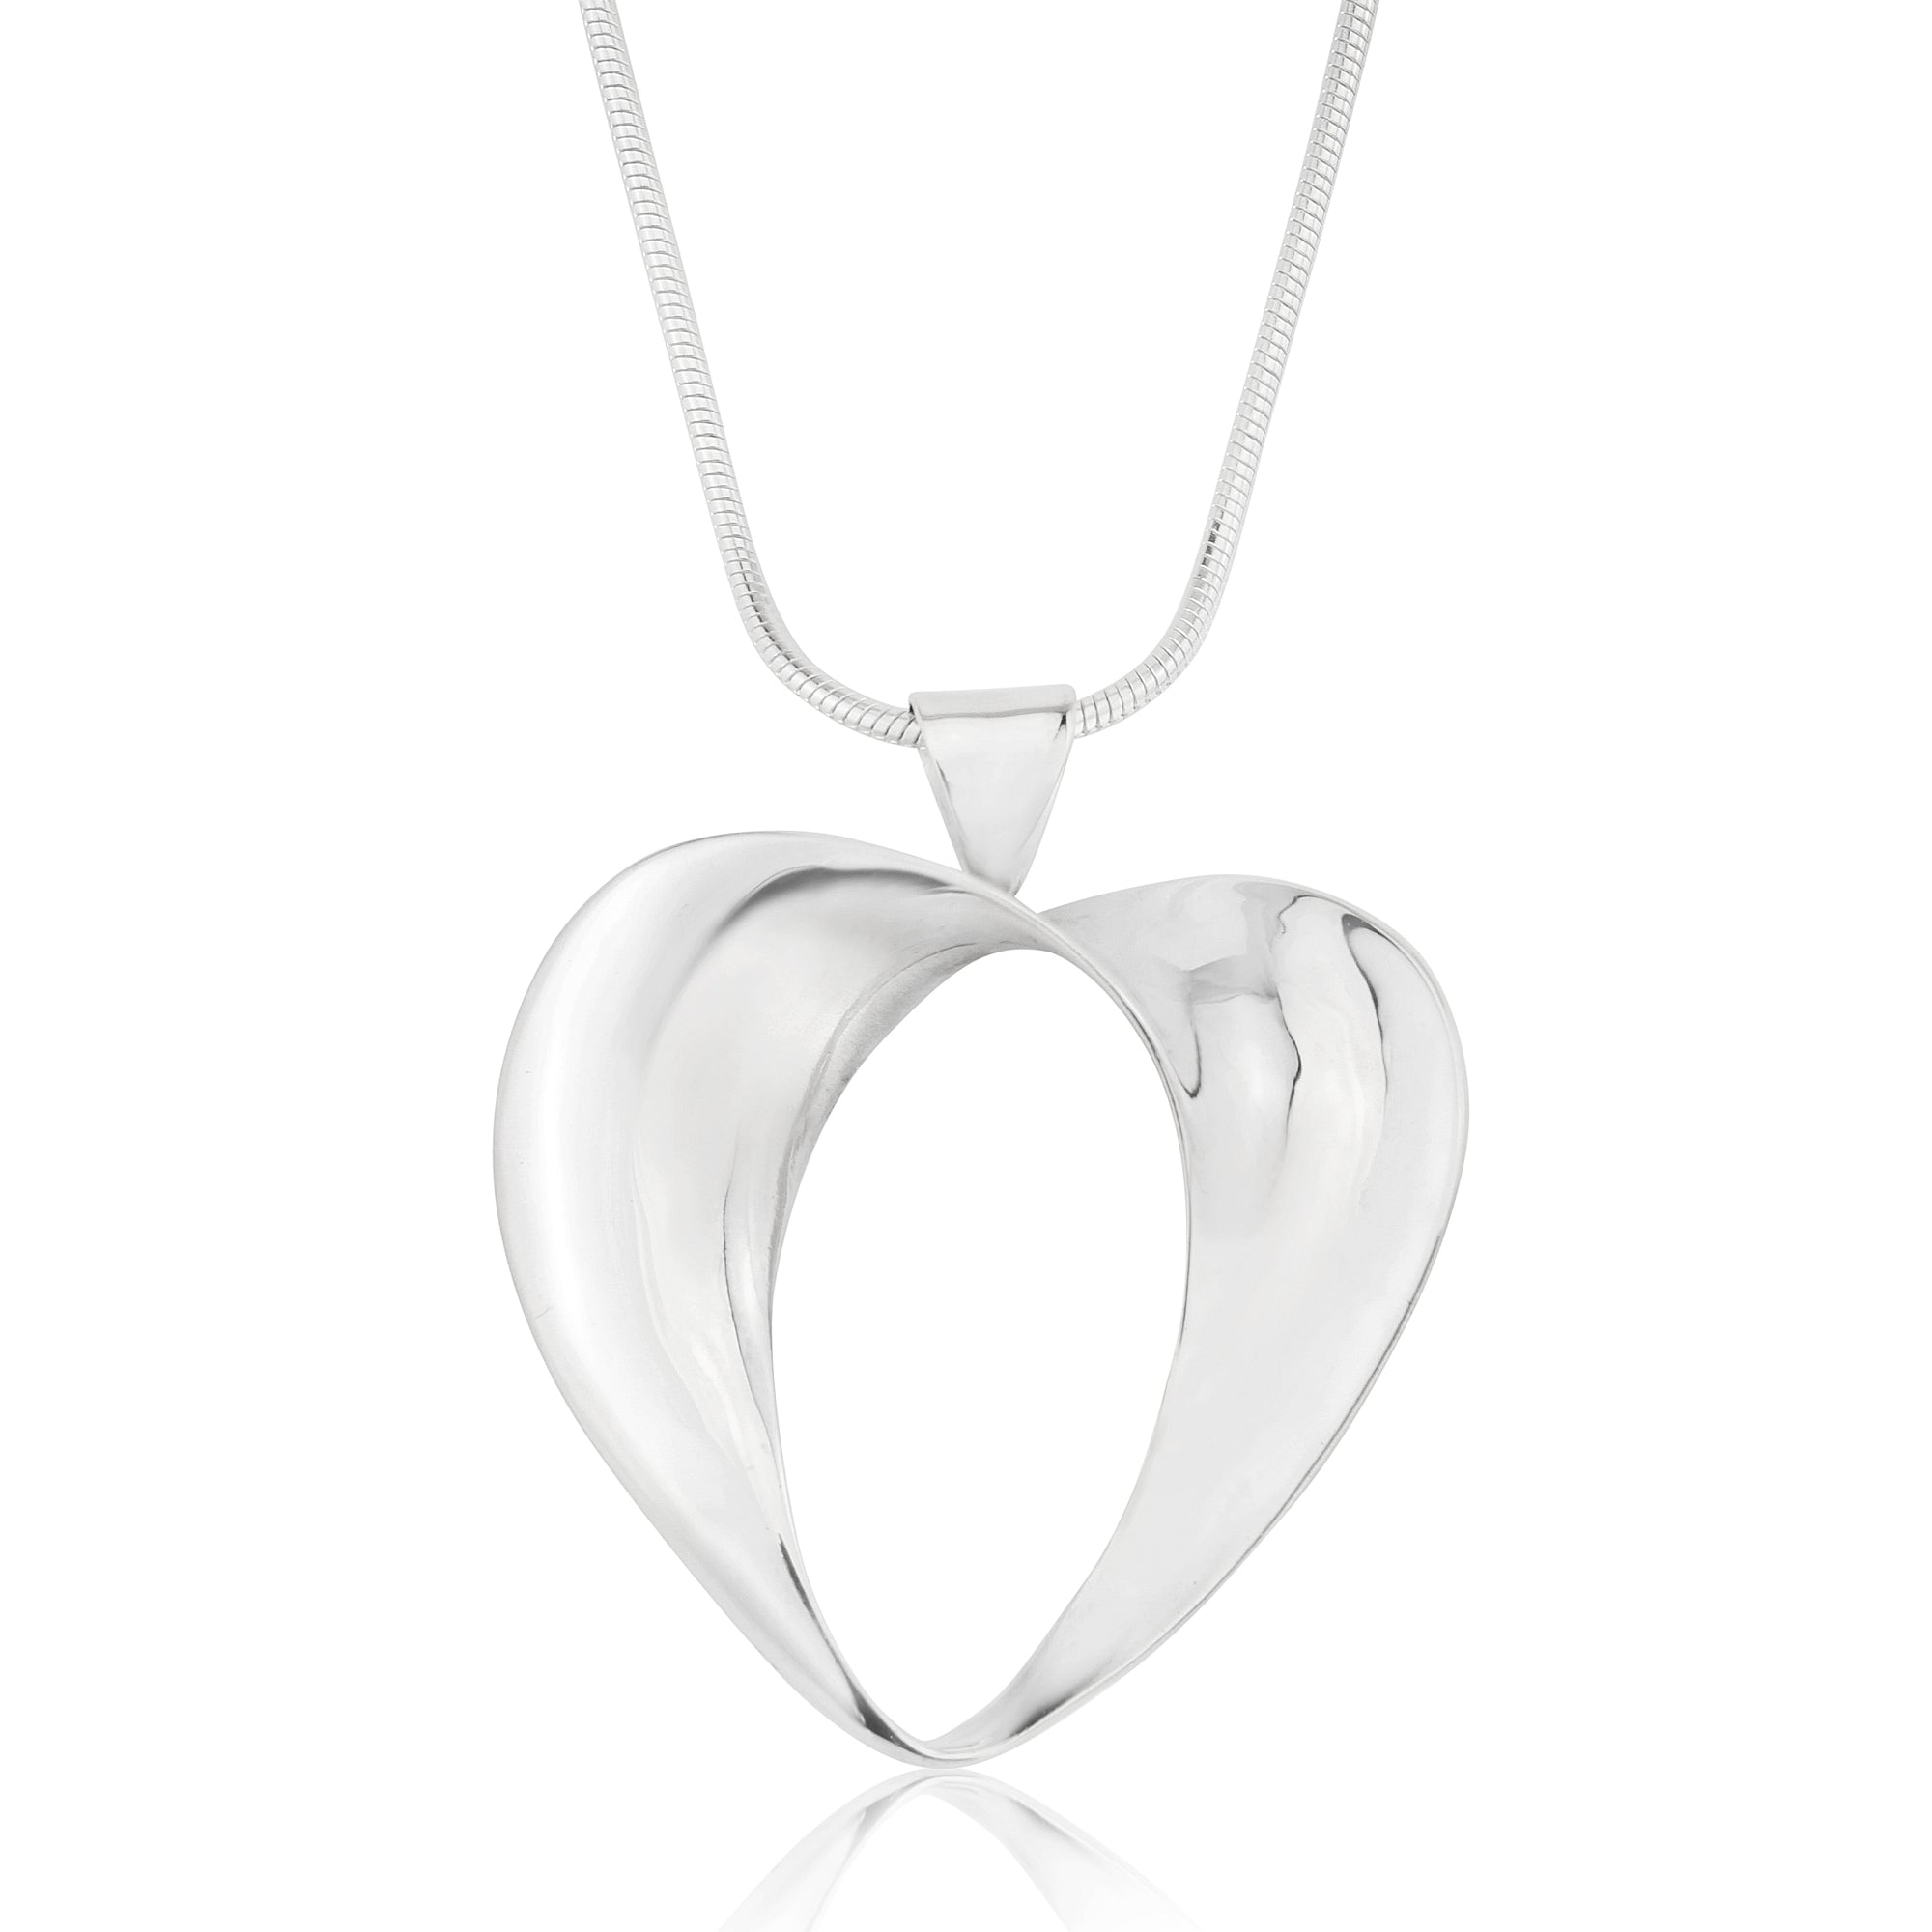 Handcrafted Silver Twisted Heart Pendant